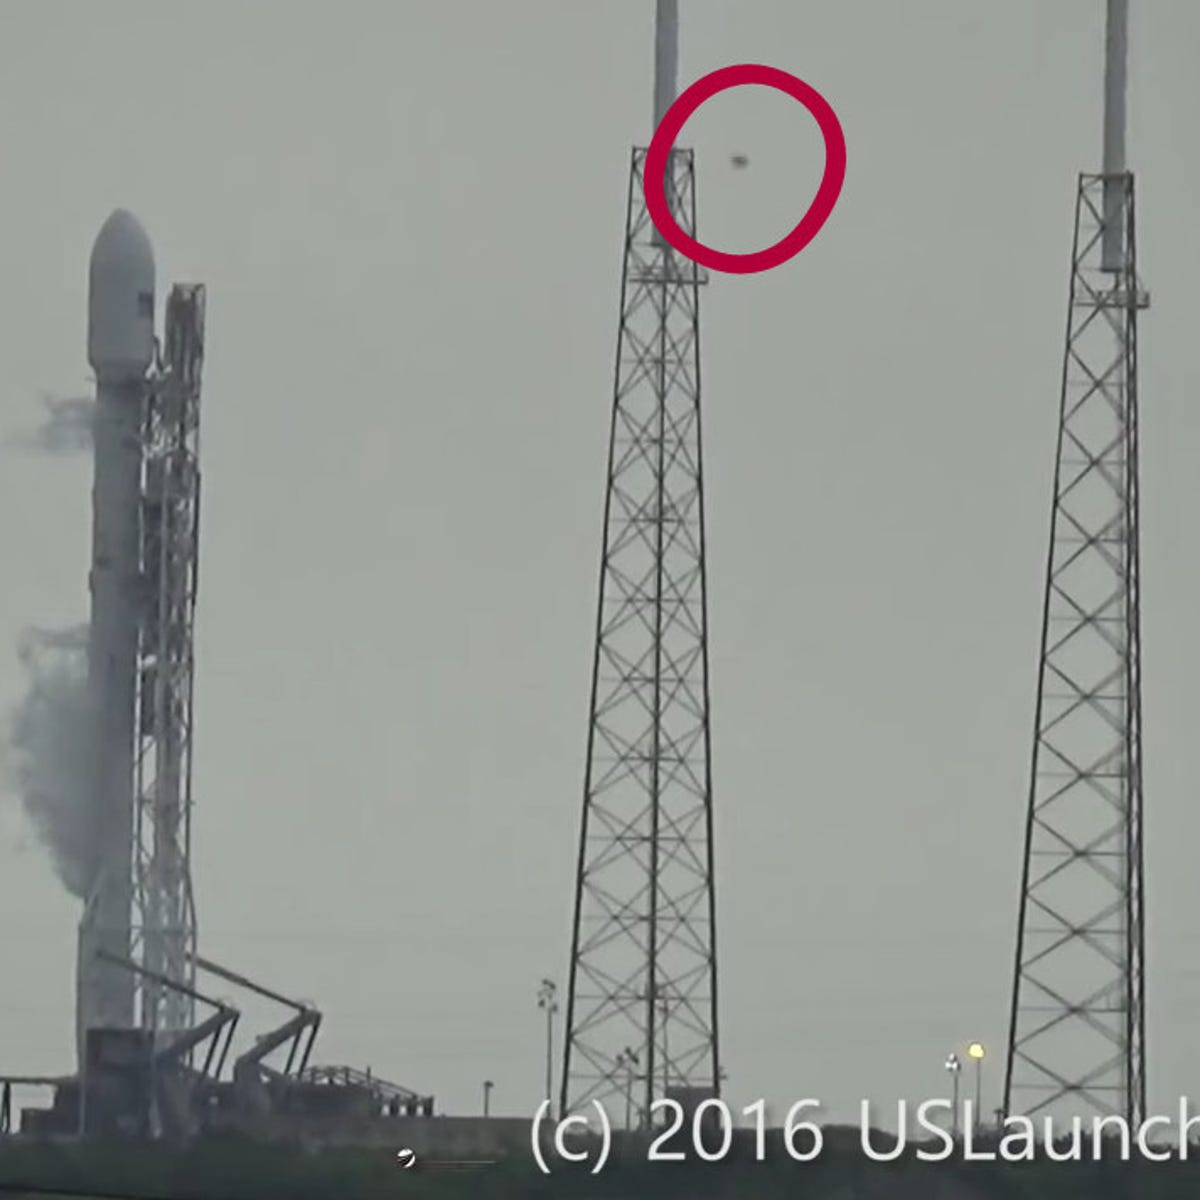 Internet spots UFO in SpaceX explosion footage - CNET